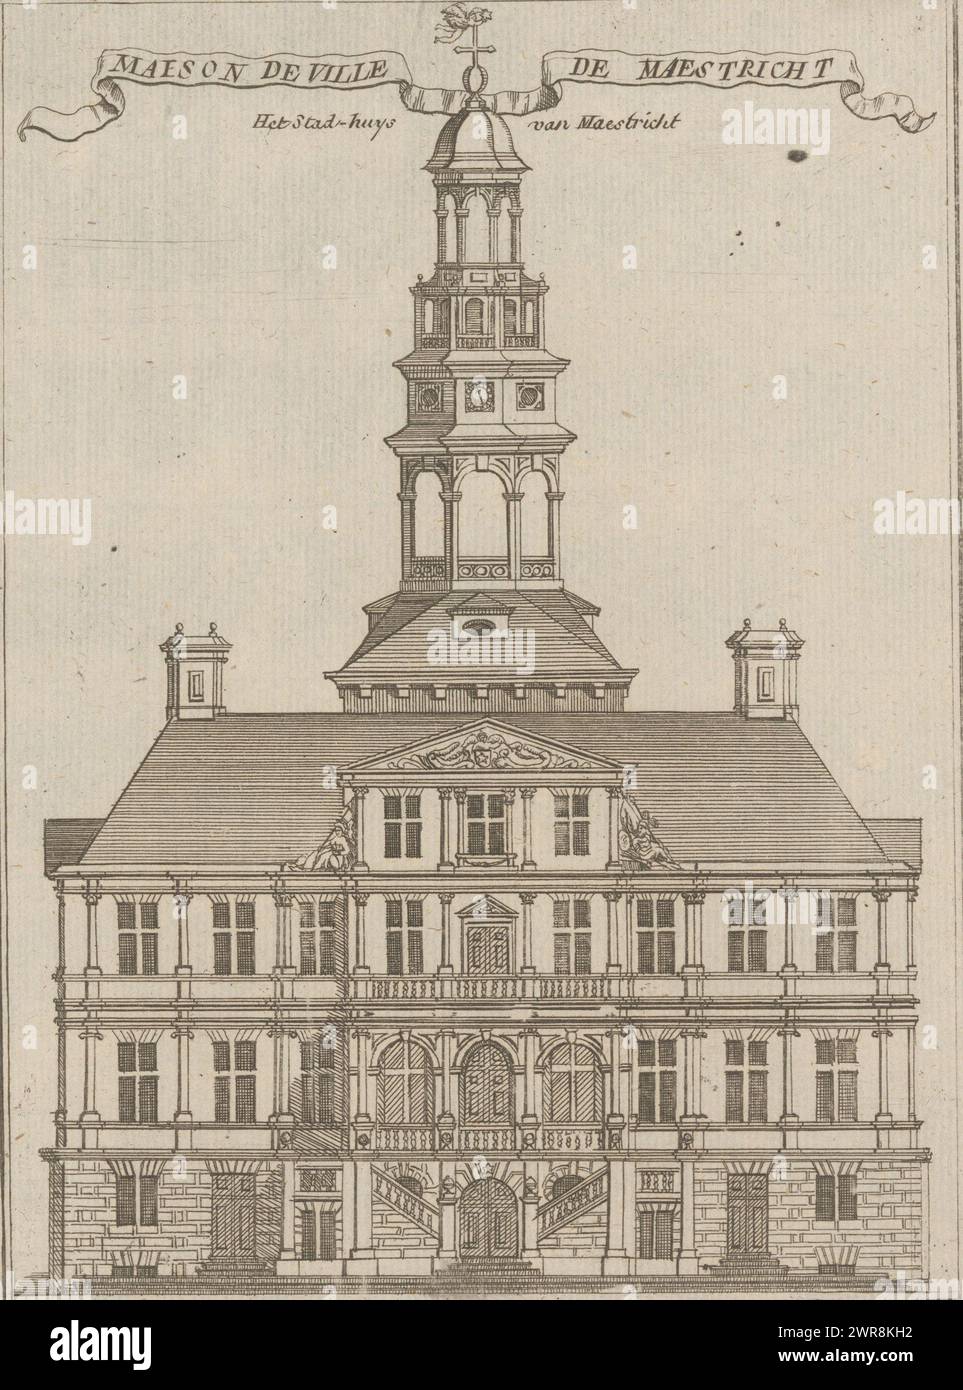 View of the Town Hall in Maastricht, Maeson de ville de Maestricht / The Stad-huys of Maestricht (title on object), print maker: Jacobus Harrewijn, (possibly), 1700 - 1750, paper, etching, height 197 mm × width 155 mm, print Stock Photo